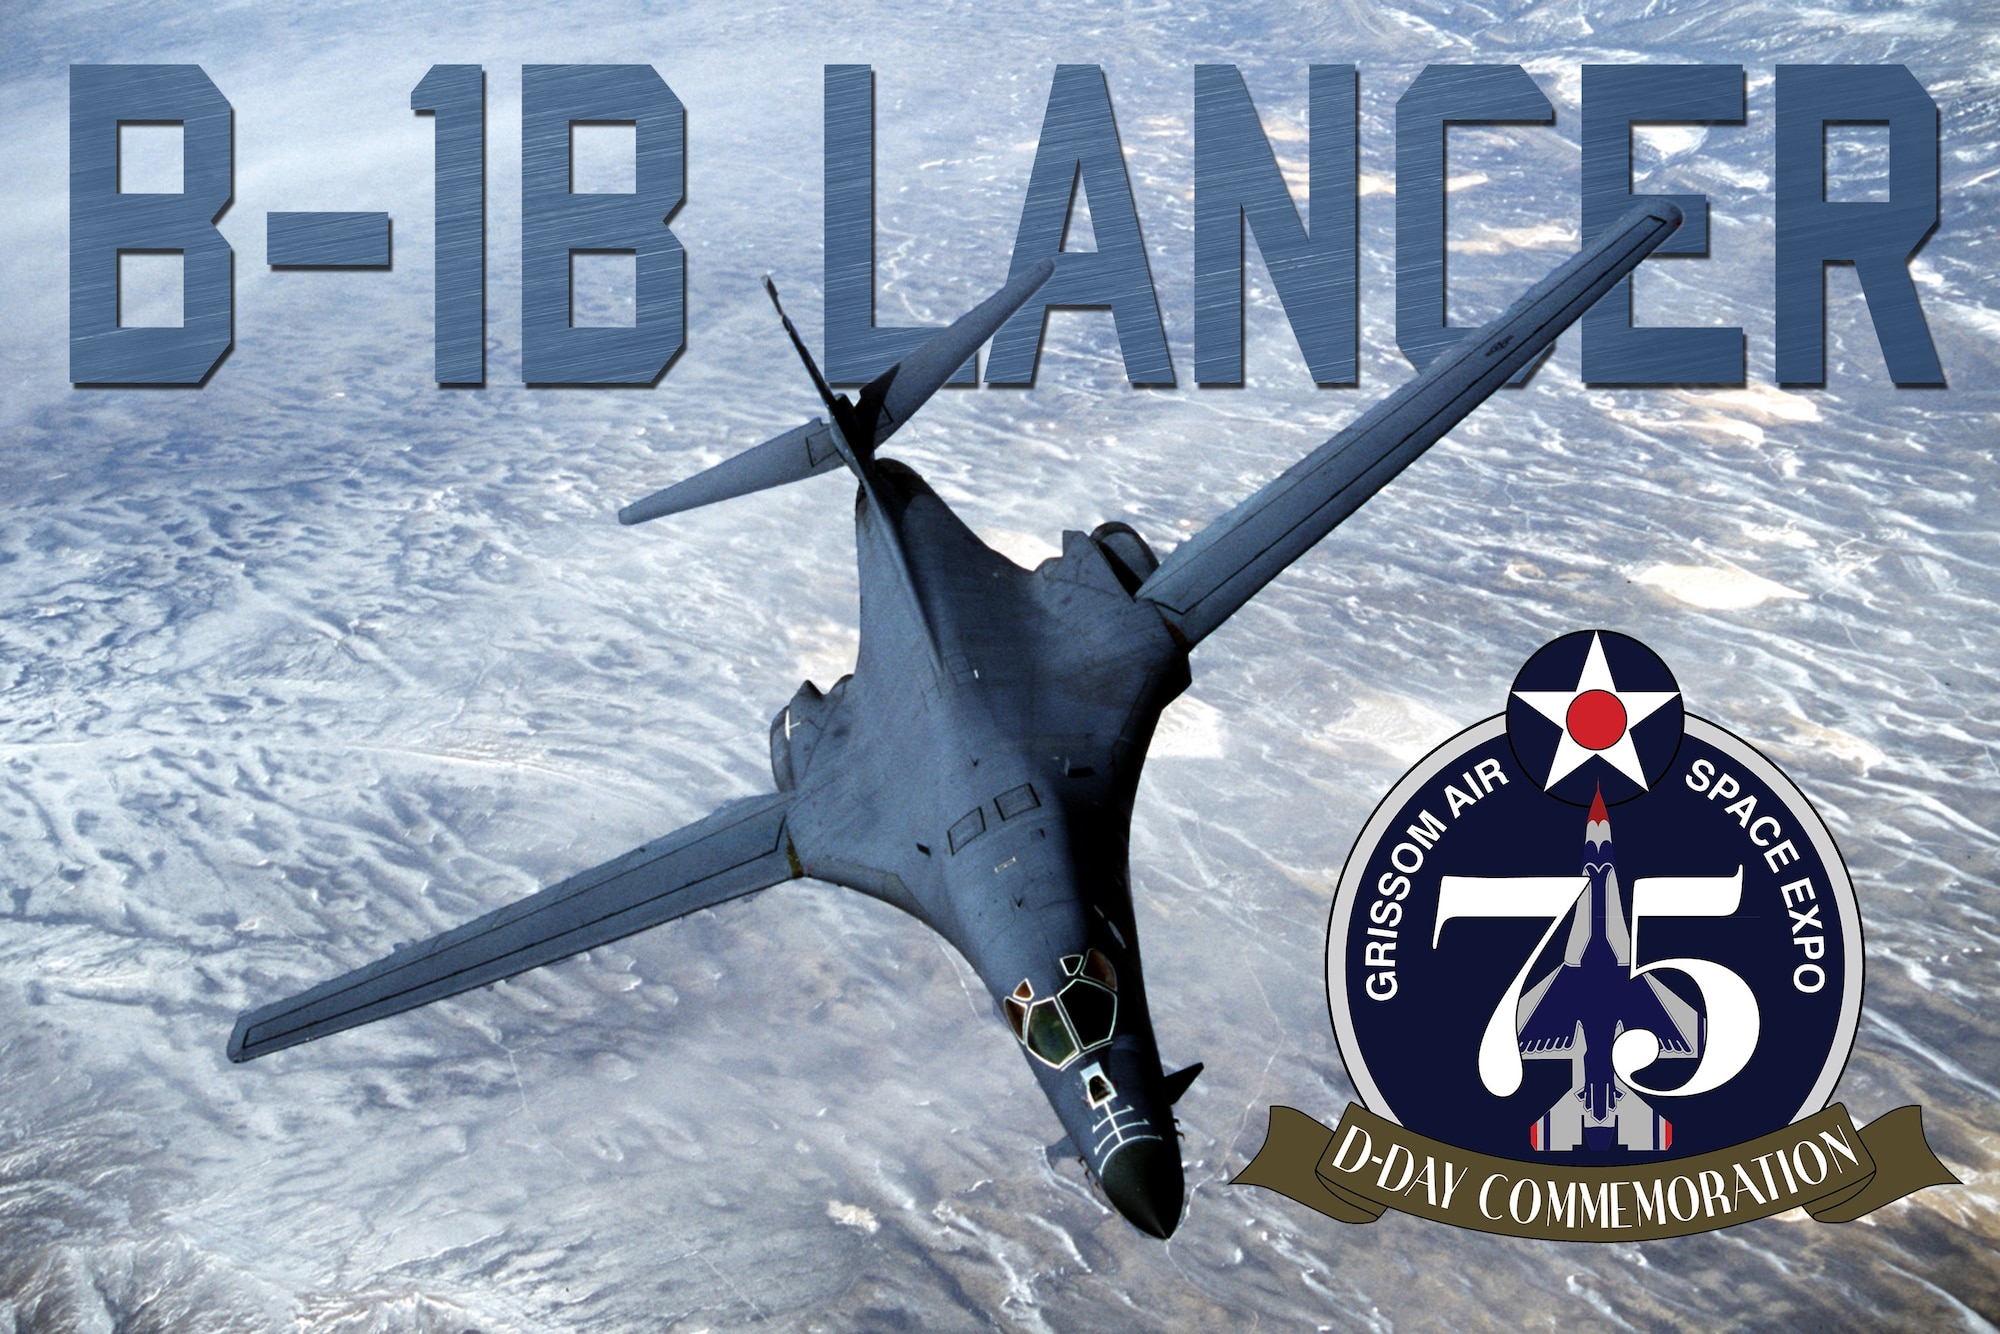 The B-1B Lancer is just one of many attractions schedule to appear at the 2019 Grissom Air and Space Expo Sept. 7-8, 2019. The B-1B lancer entered service in 1986 and was designed as a strategic bomber with supersonic speed. 
(U.S. Air Force graphic by Senior Airman Harrison Withrow)